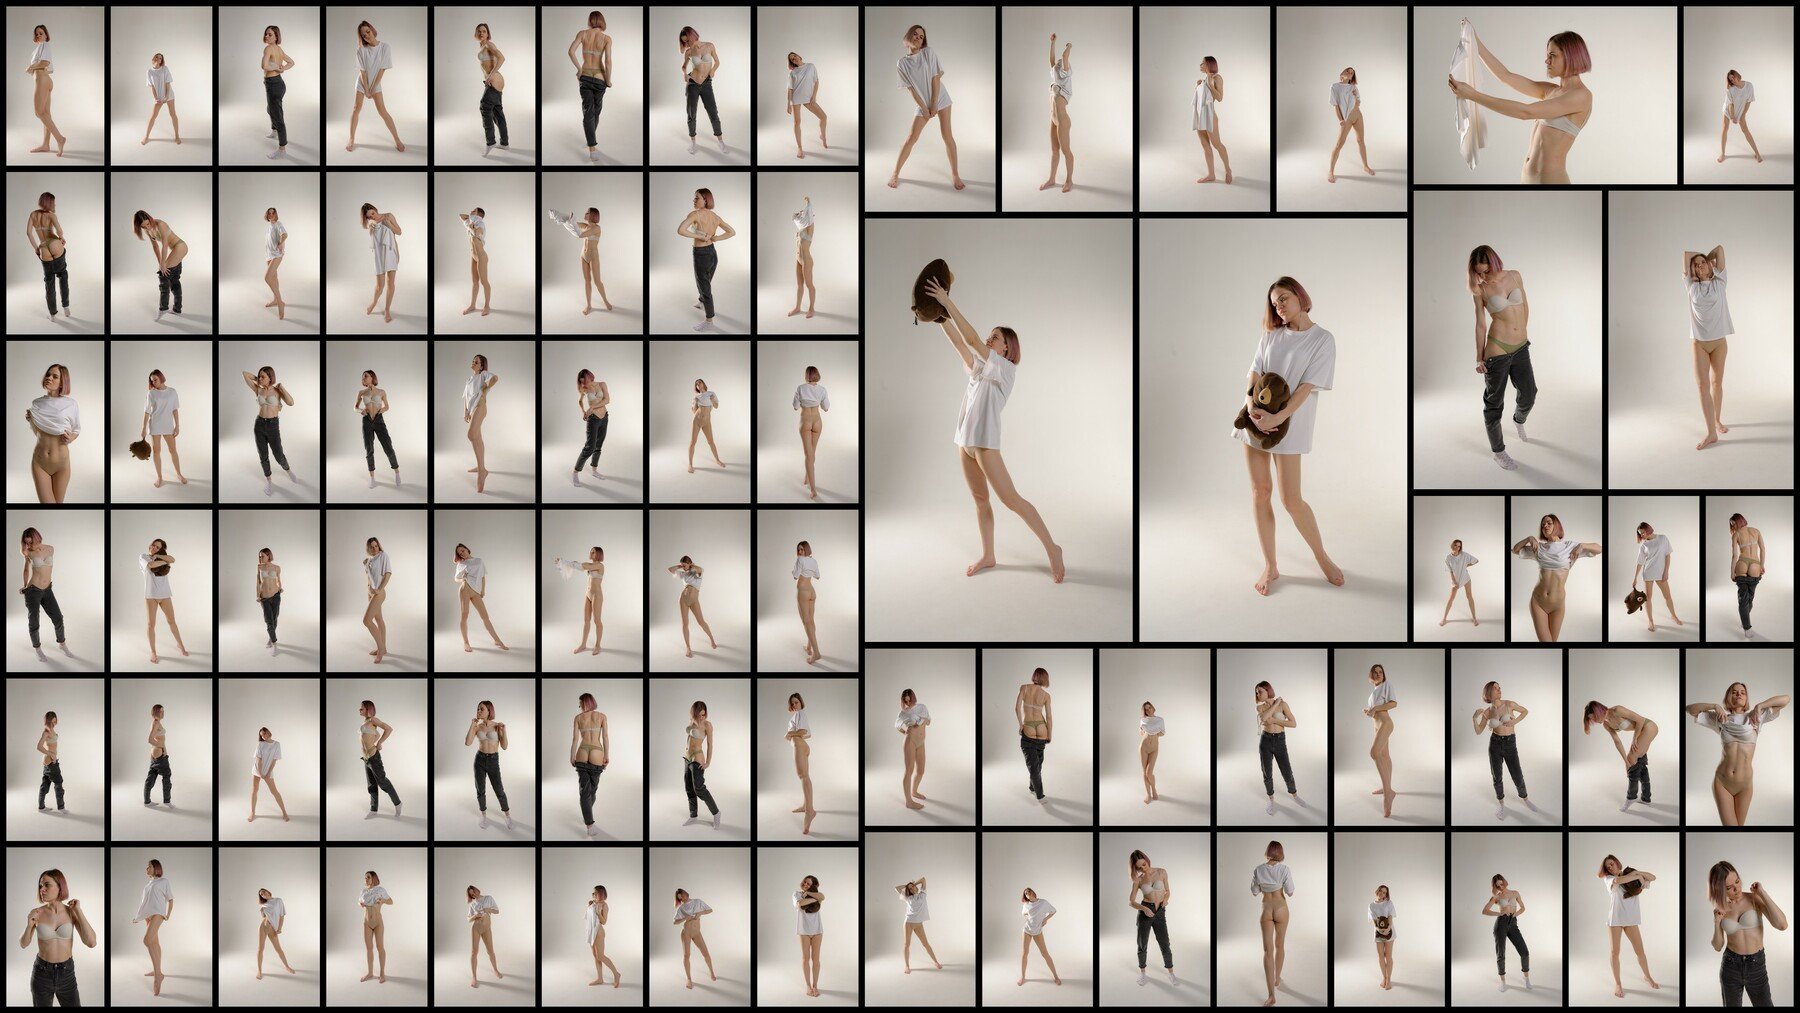 600+ Casual Women Pose References for Artists 1